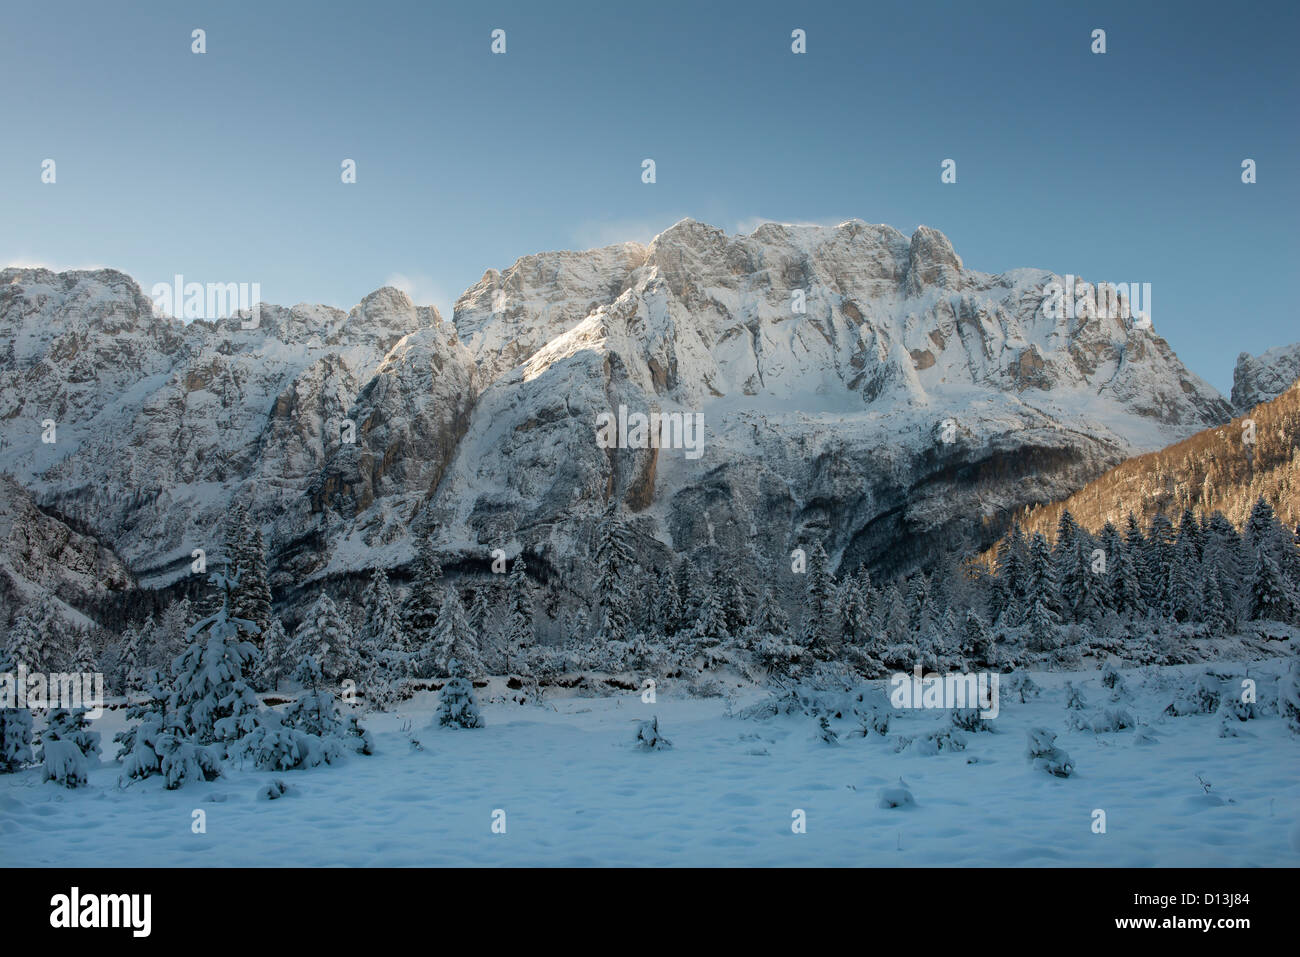 a view of Jof di Montasio Mount in winter Stock Photo